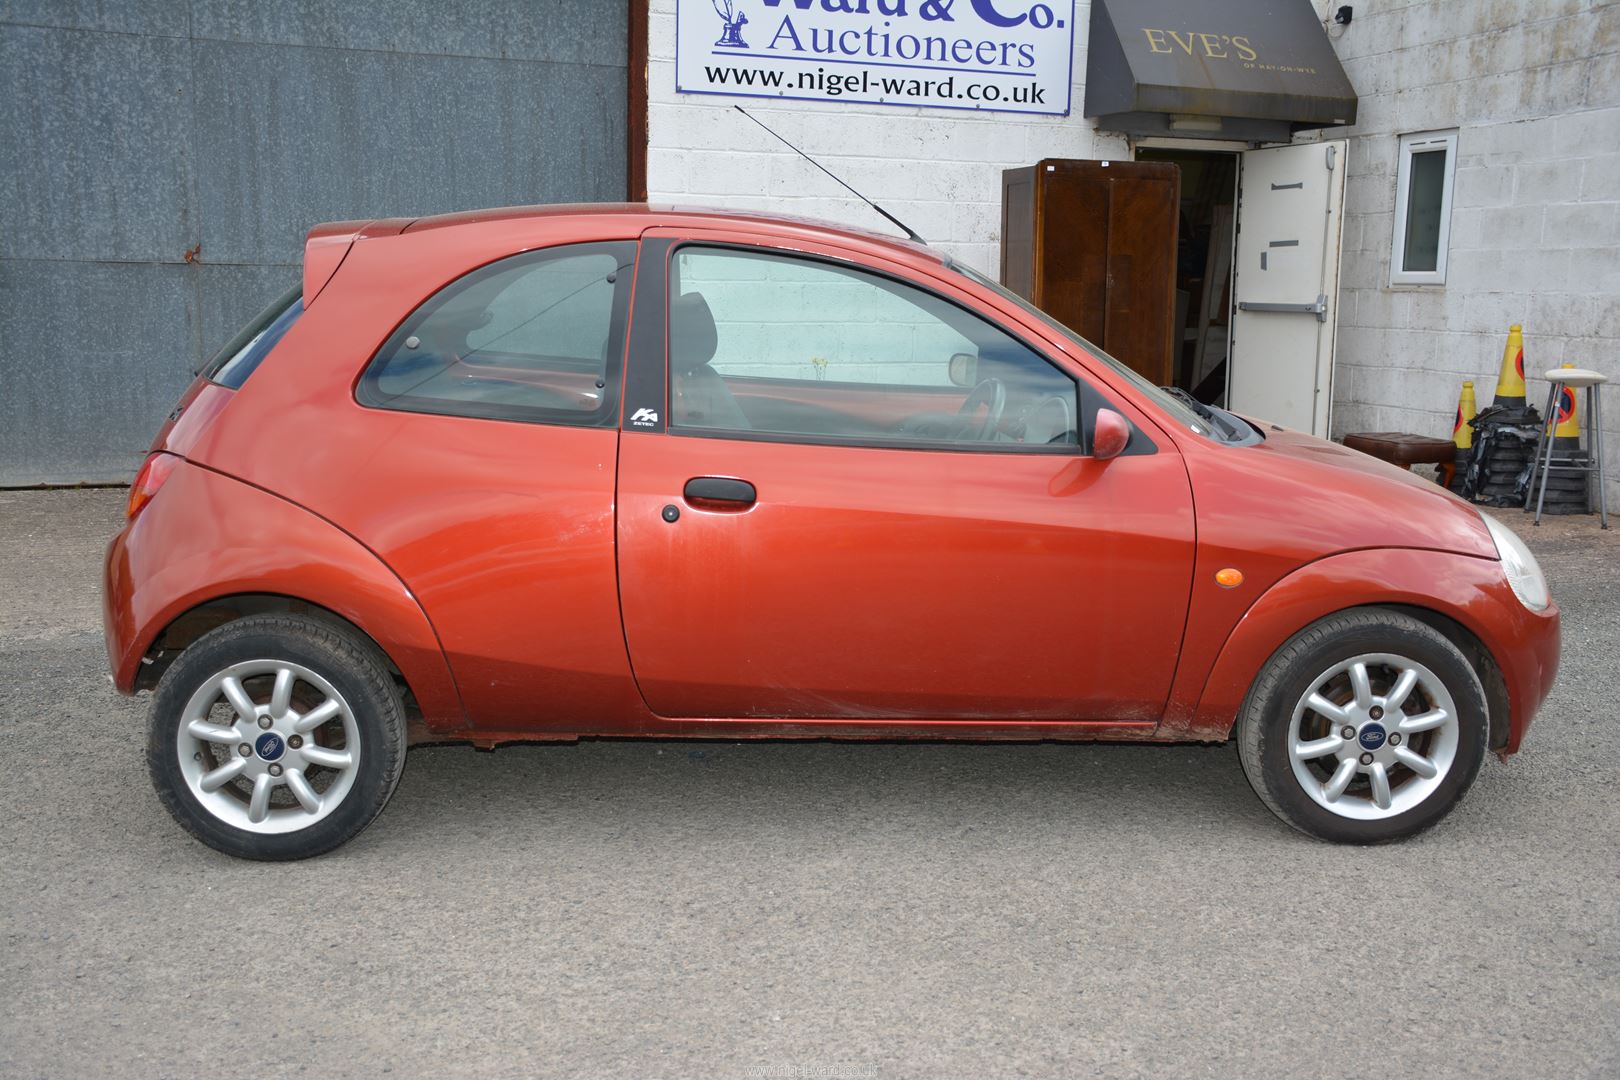 A Ford KA Zetec Climate 1299cc petrol-engined three door hatchback motor Car finished in red, - Image 8 of 14